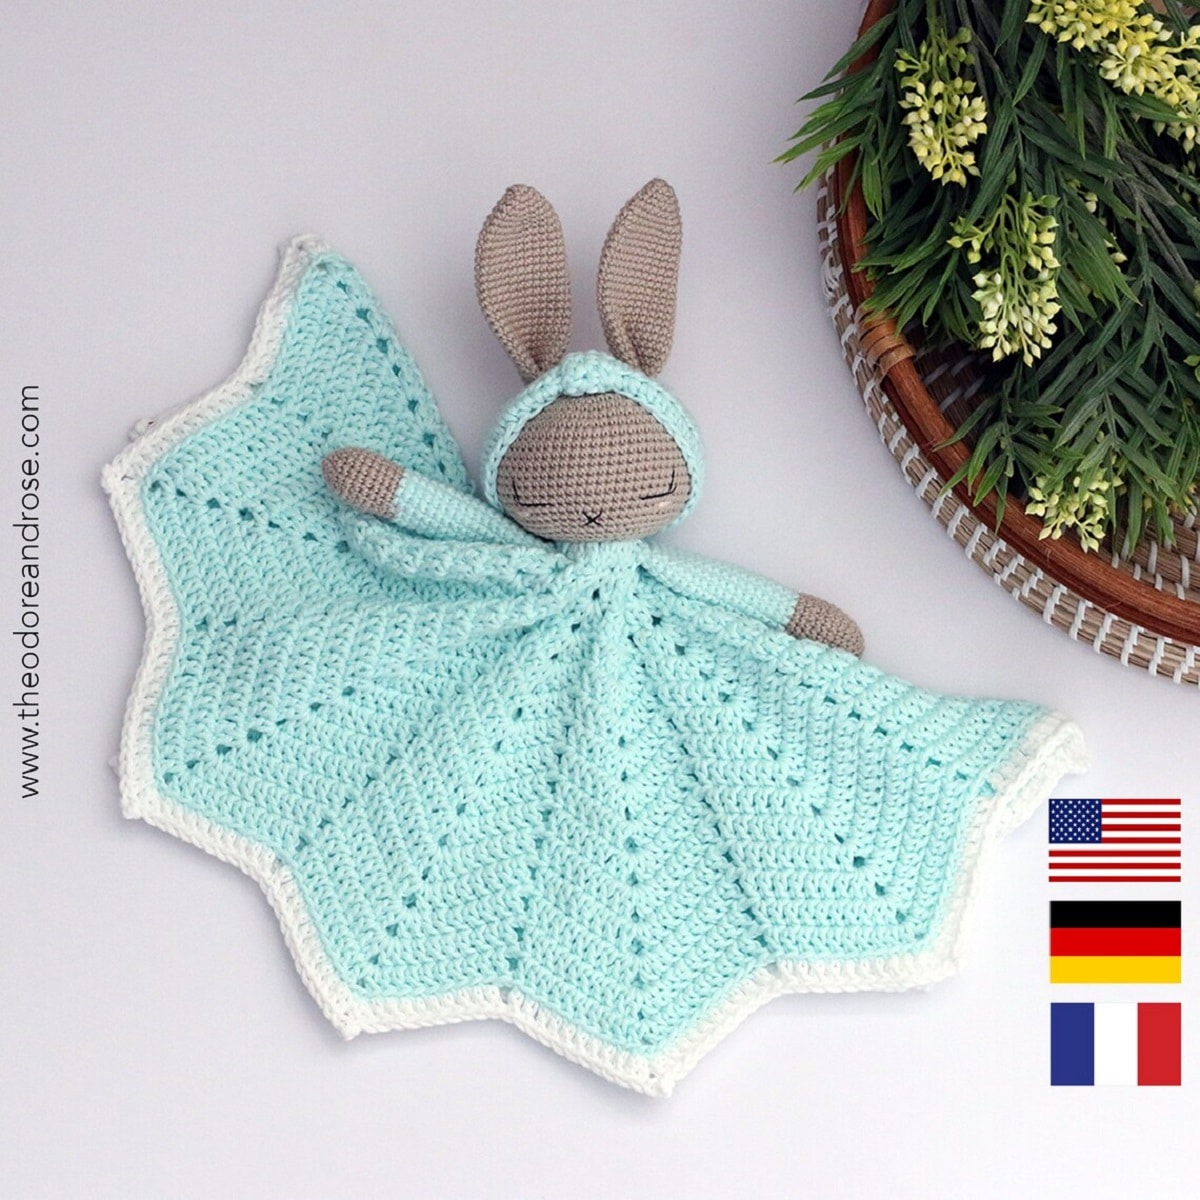 Blue crochet blanket with a zig zag hem and brown bunny head and blue arms attached to the top on a white background.